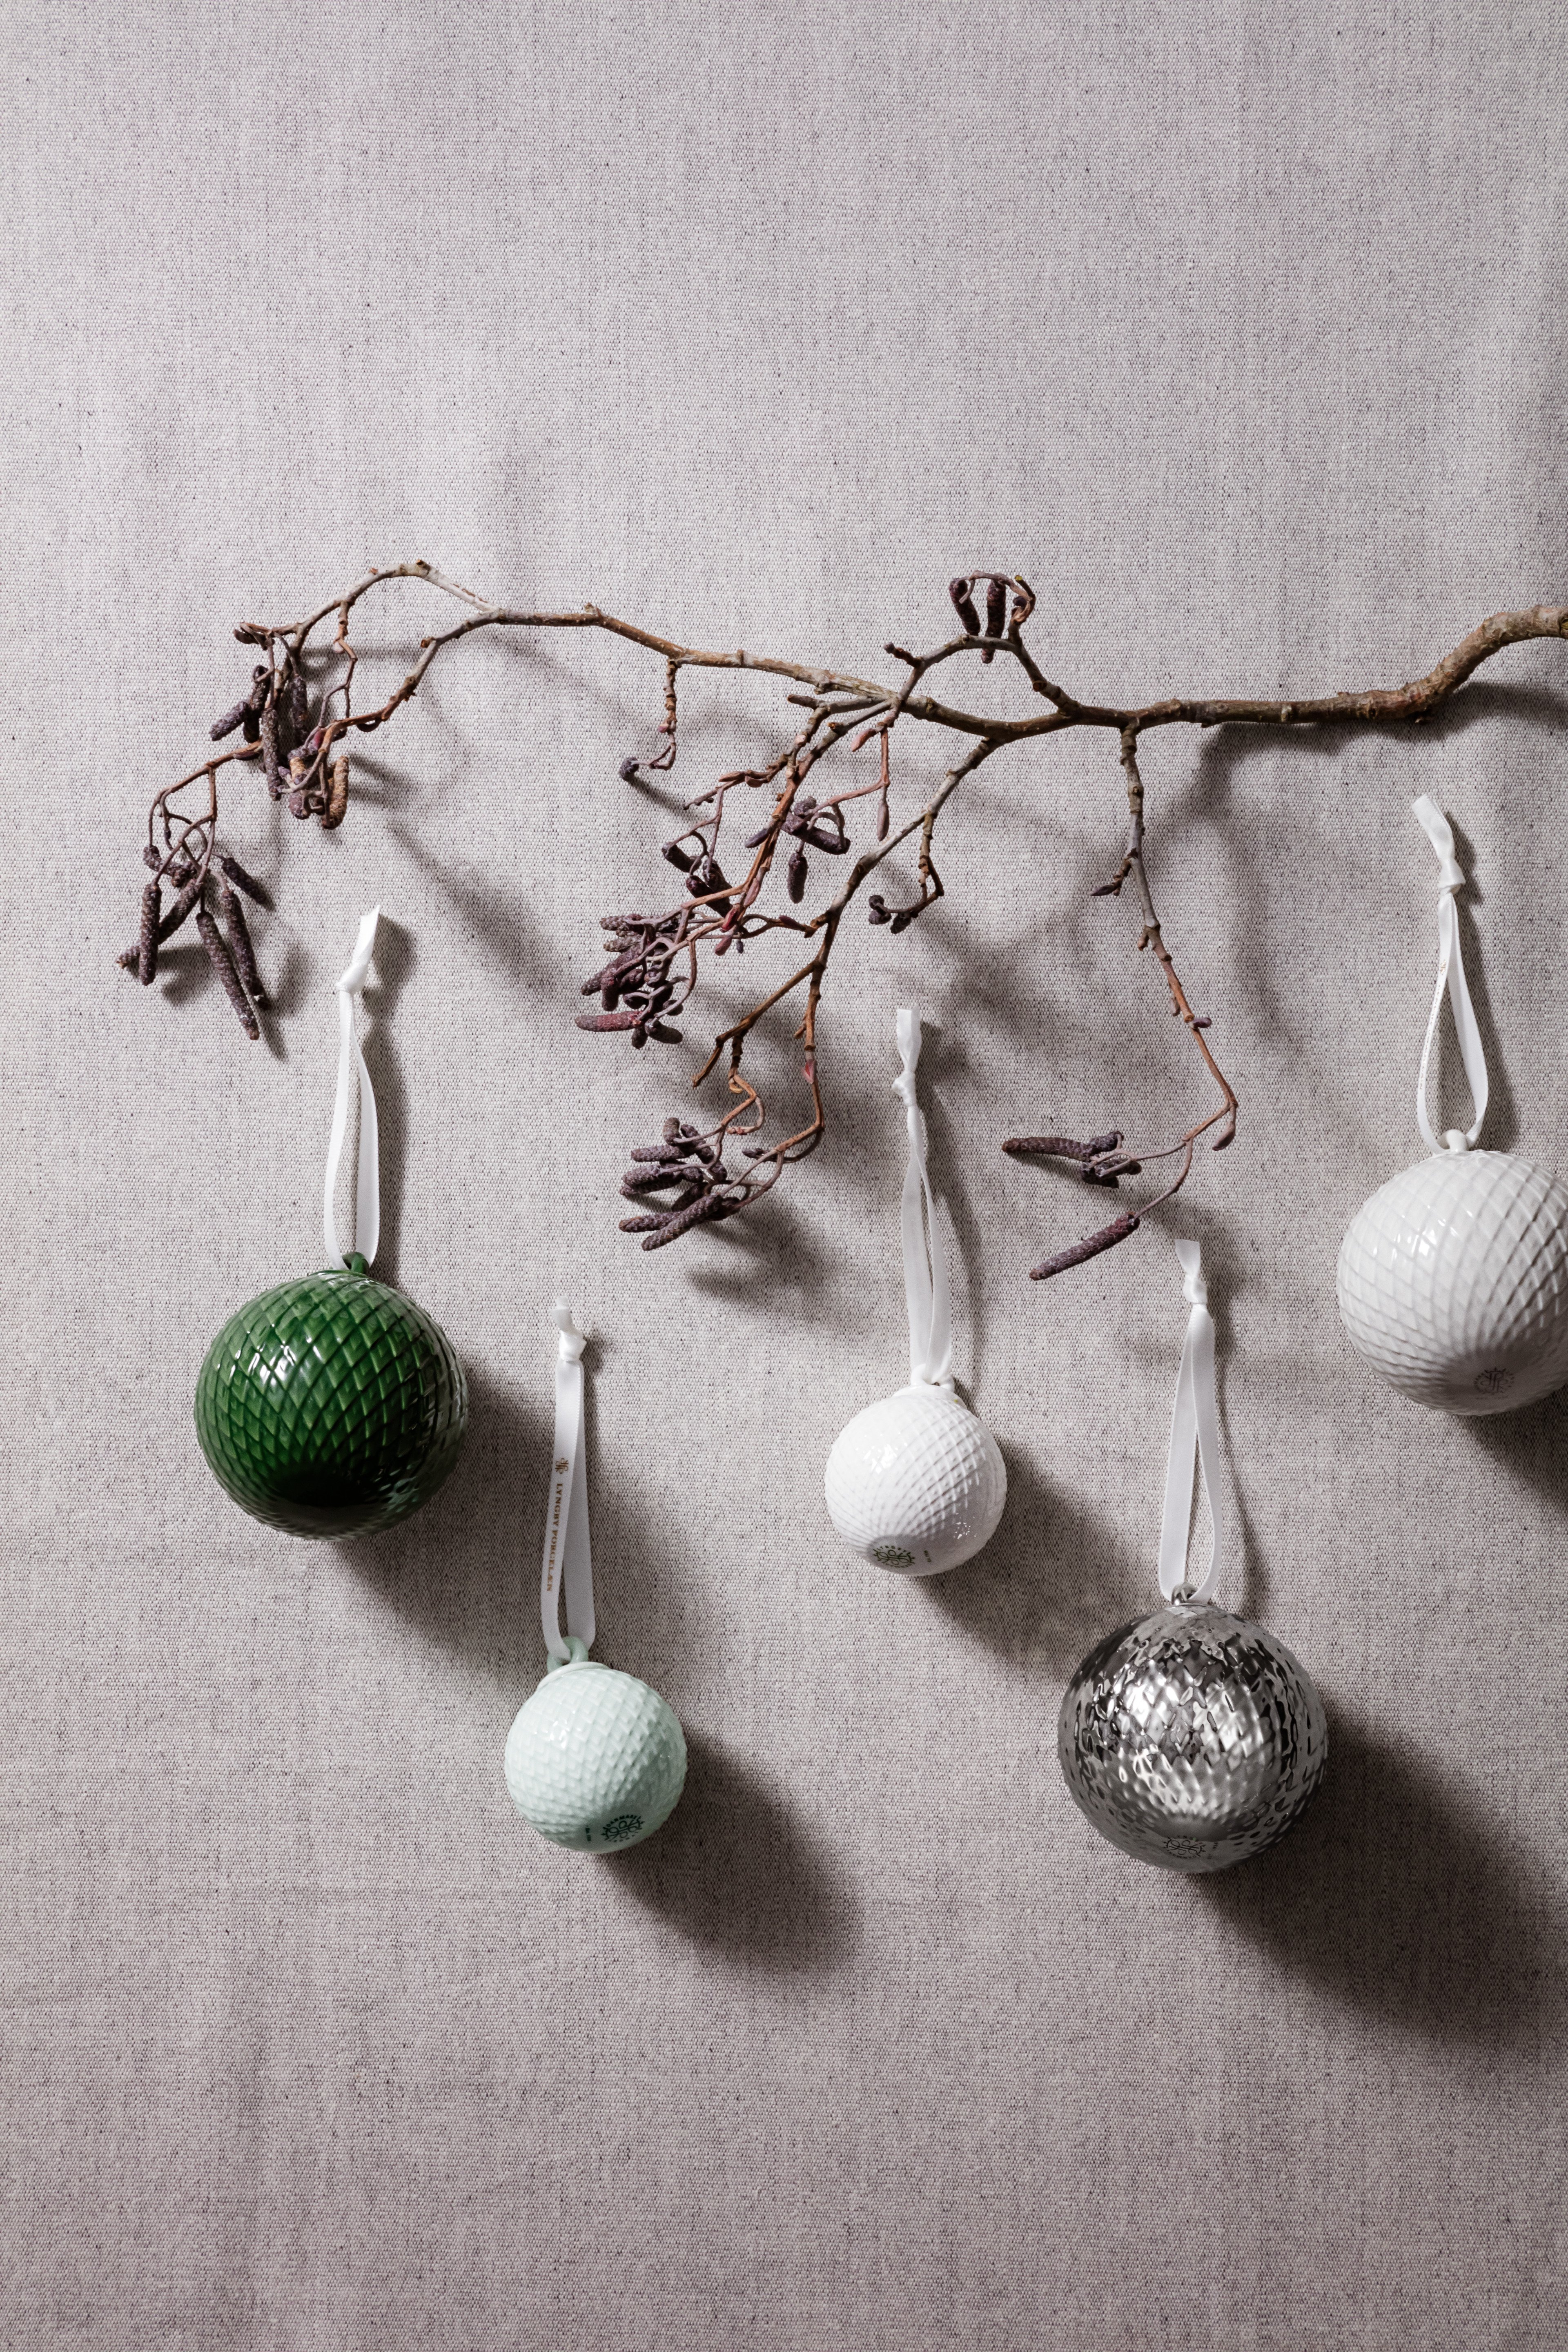 Fine decorative baubles for hanging